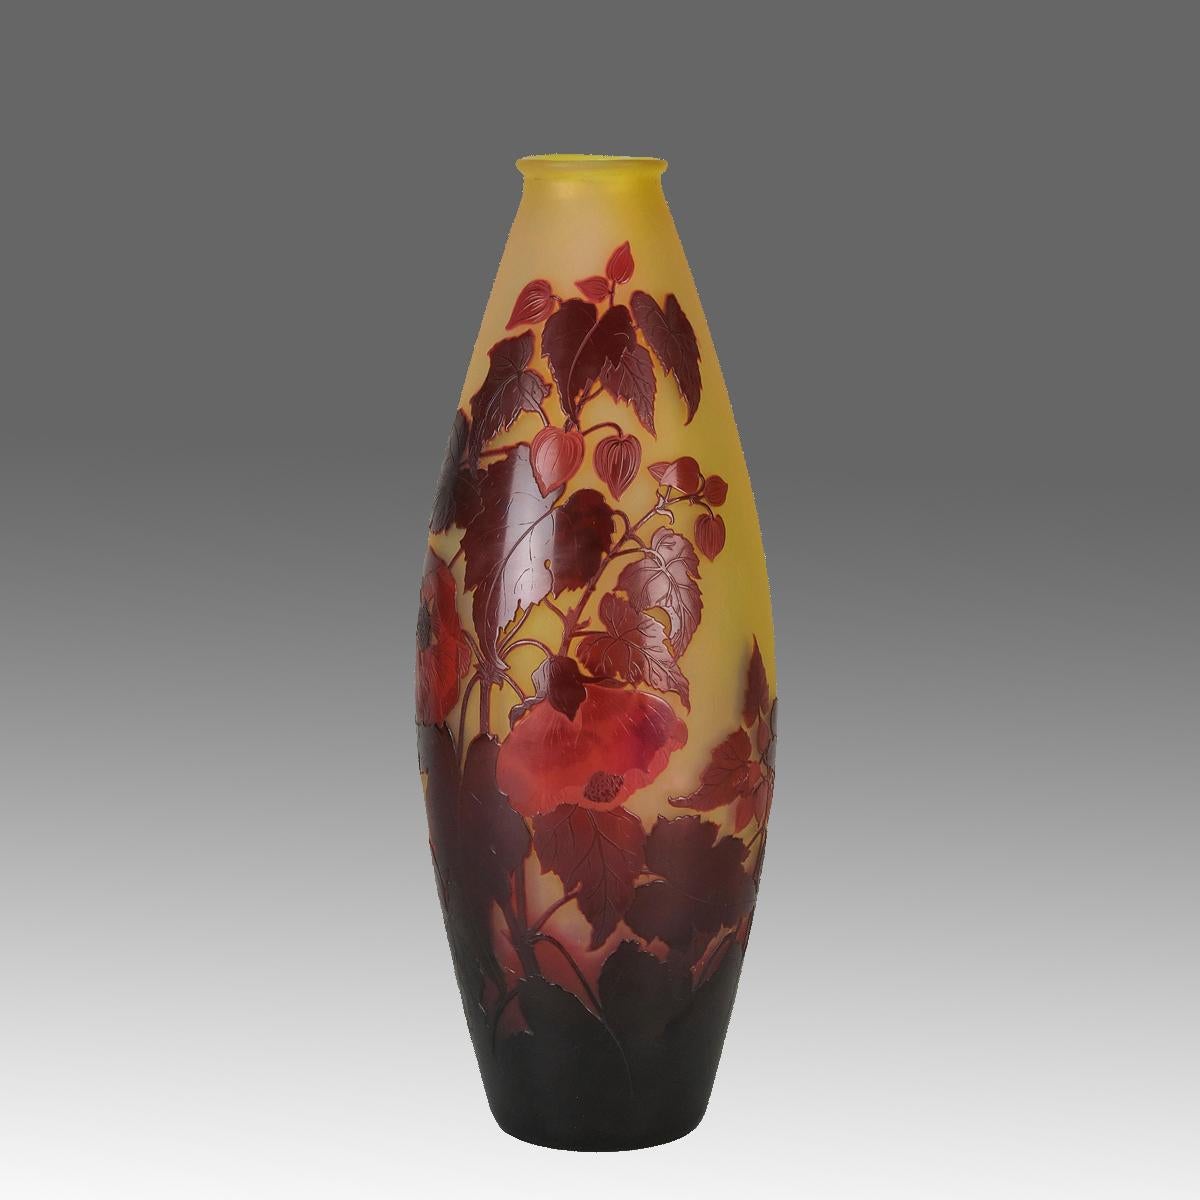 An attractive late 19th Century French cameo glass vase decorated with deep red and burgundy flowers against a variegating yellow field. Exhibiting excellent detail and colour, signed Galle in cameo.

ADDITIONAL INFORMATION
Height:                  